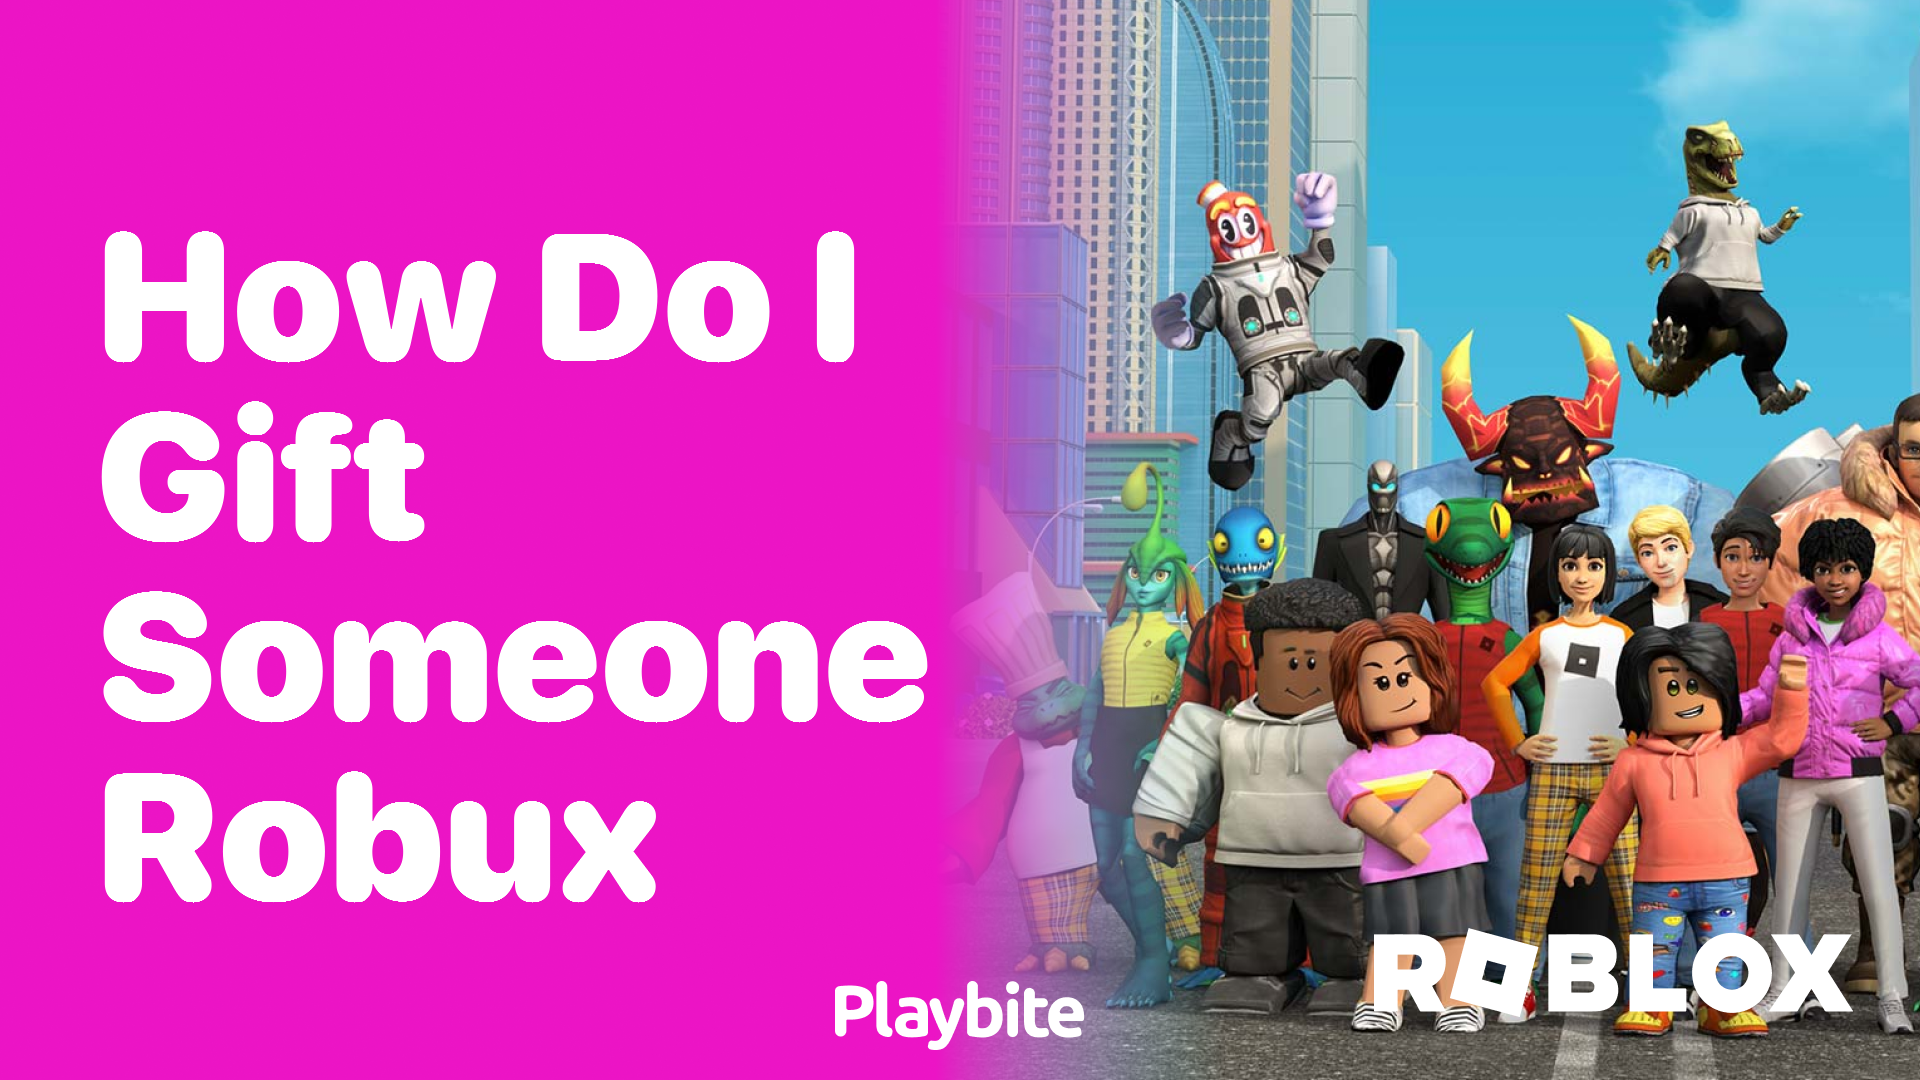 How Do I Gift Someone Robux in Roblox?